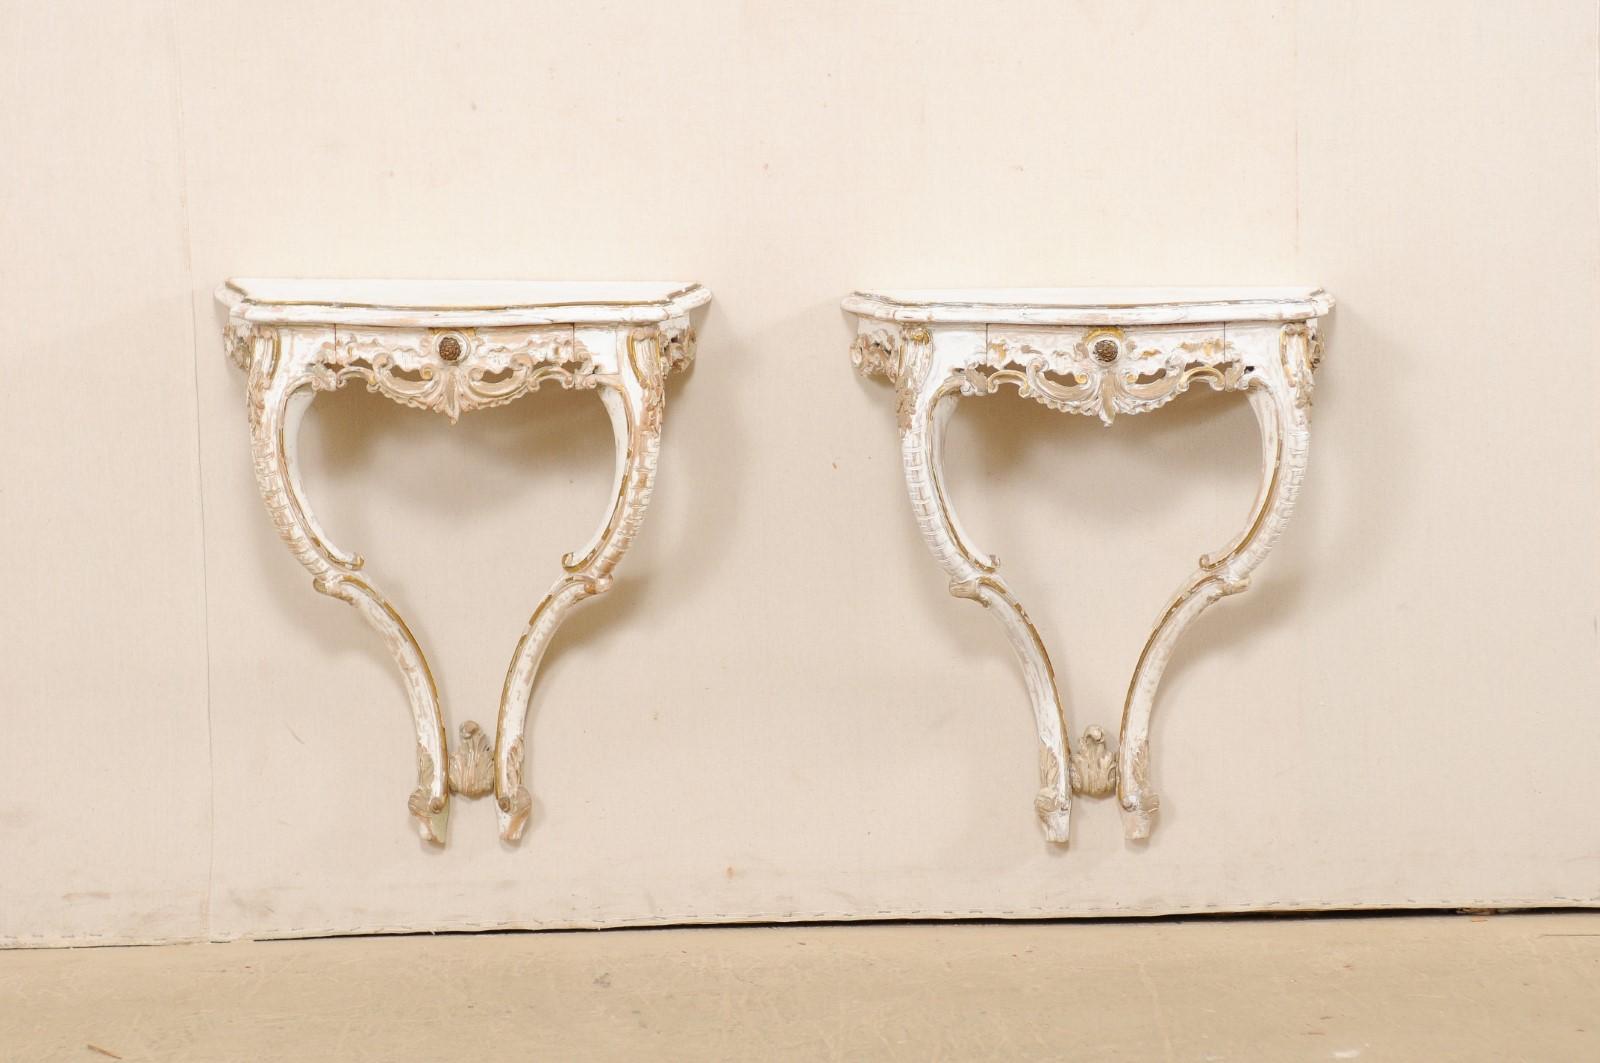 An Italian pair of carved-wood wall mounted console tables from the mid-20th century. This vintage pair of tables from Italy each feature a beautifully scalloped edge top above an elaborately pierce-carved wood skirt (which houses a single drawer at